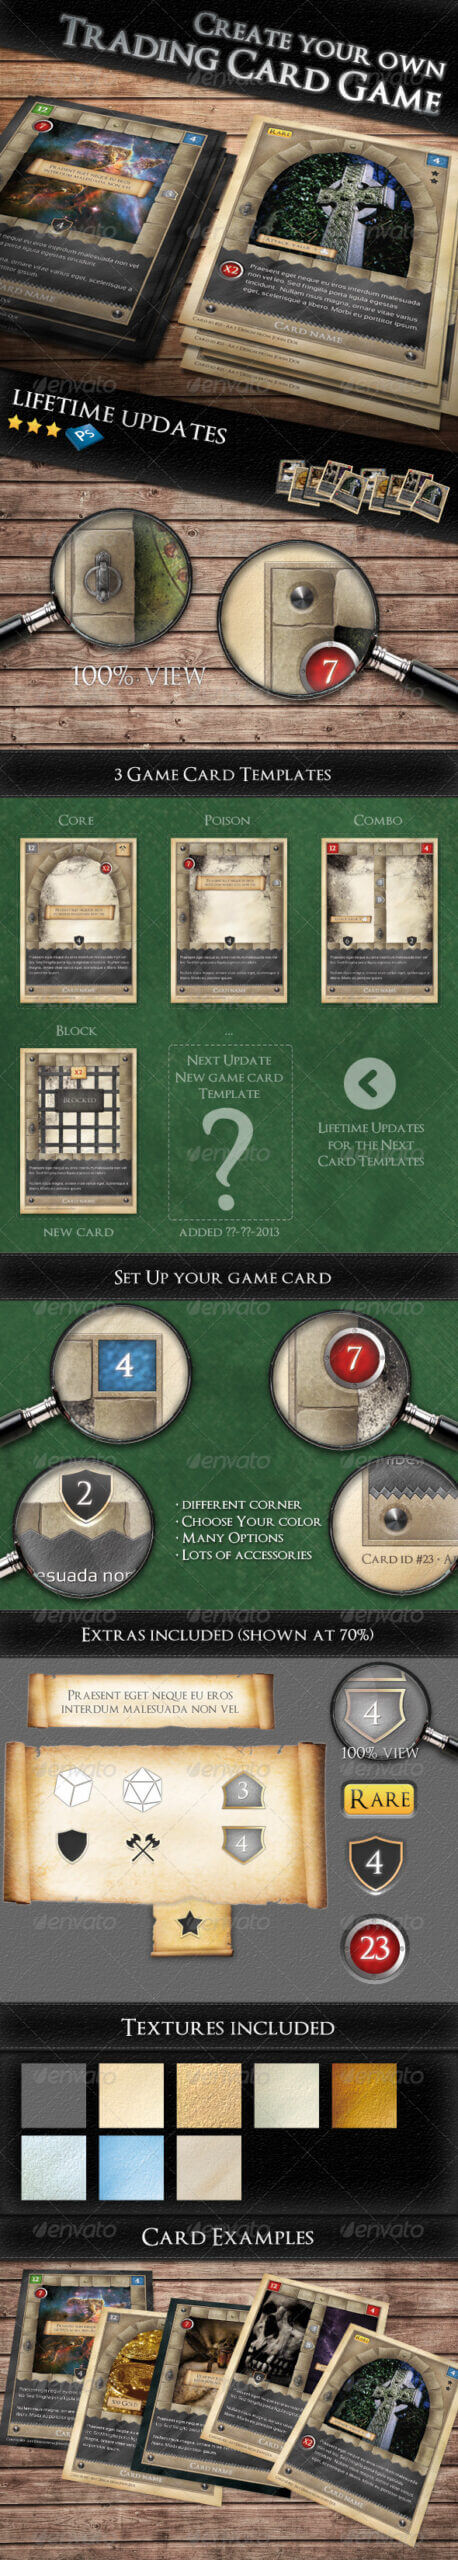 Tcg Graphics, Designs & Templates From Graphicriver Intended For Card Game Template Maker